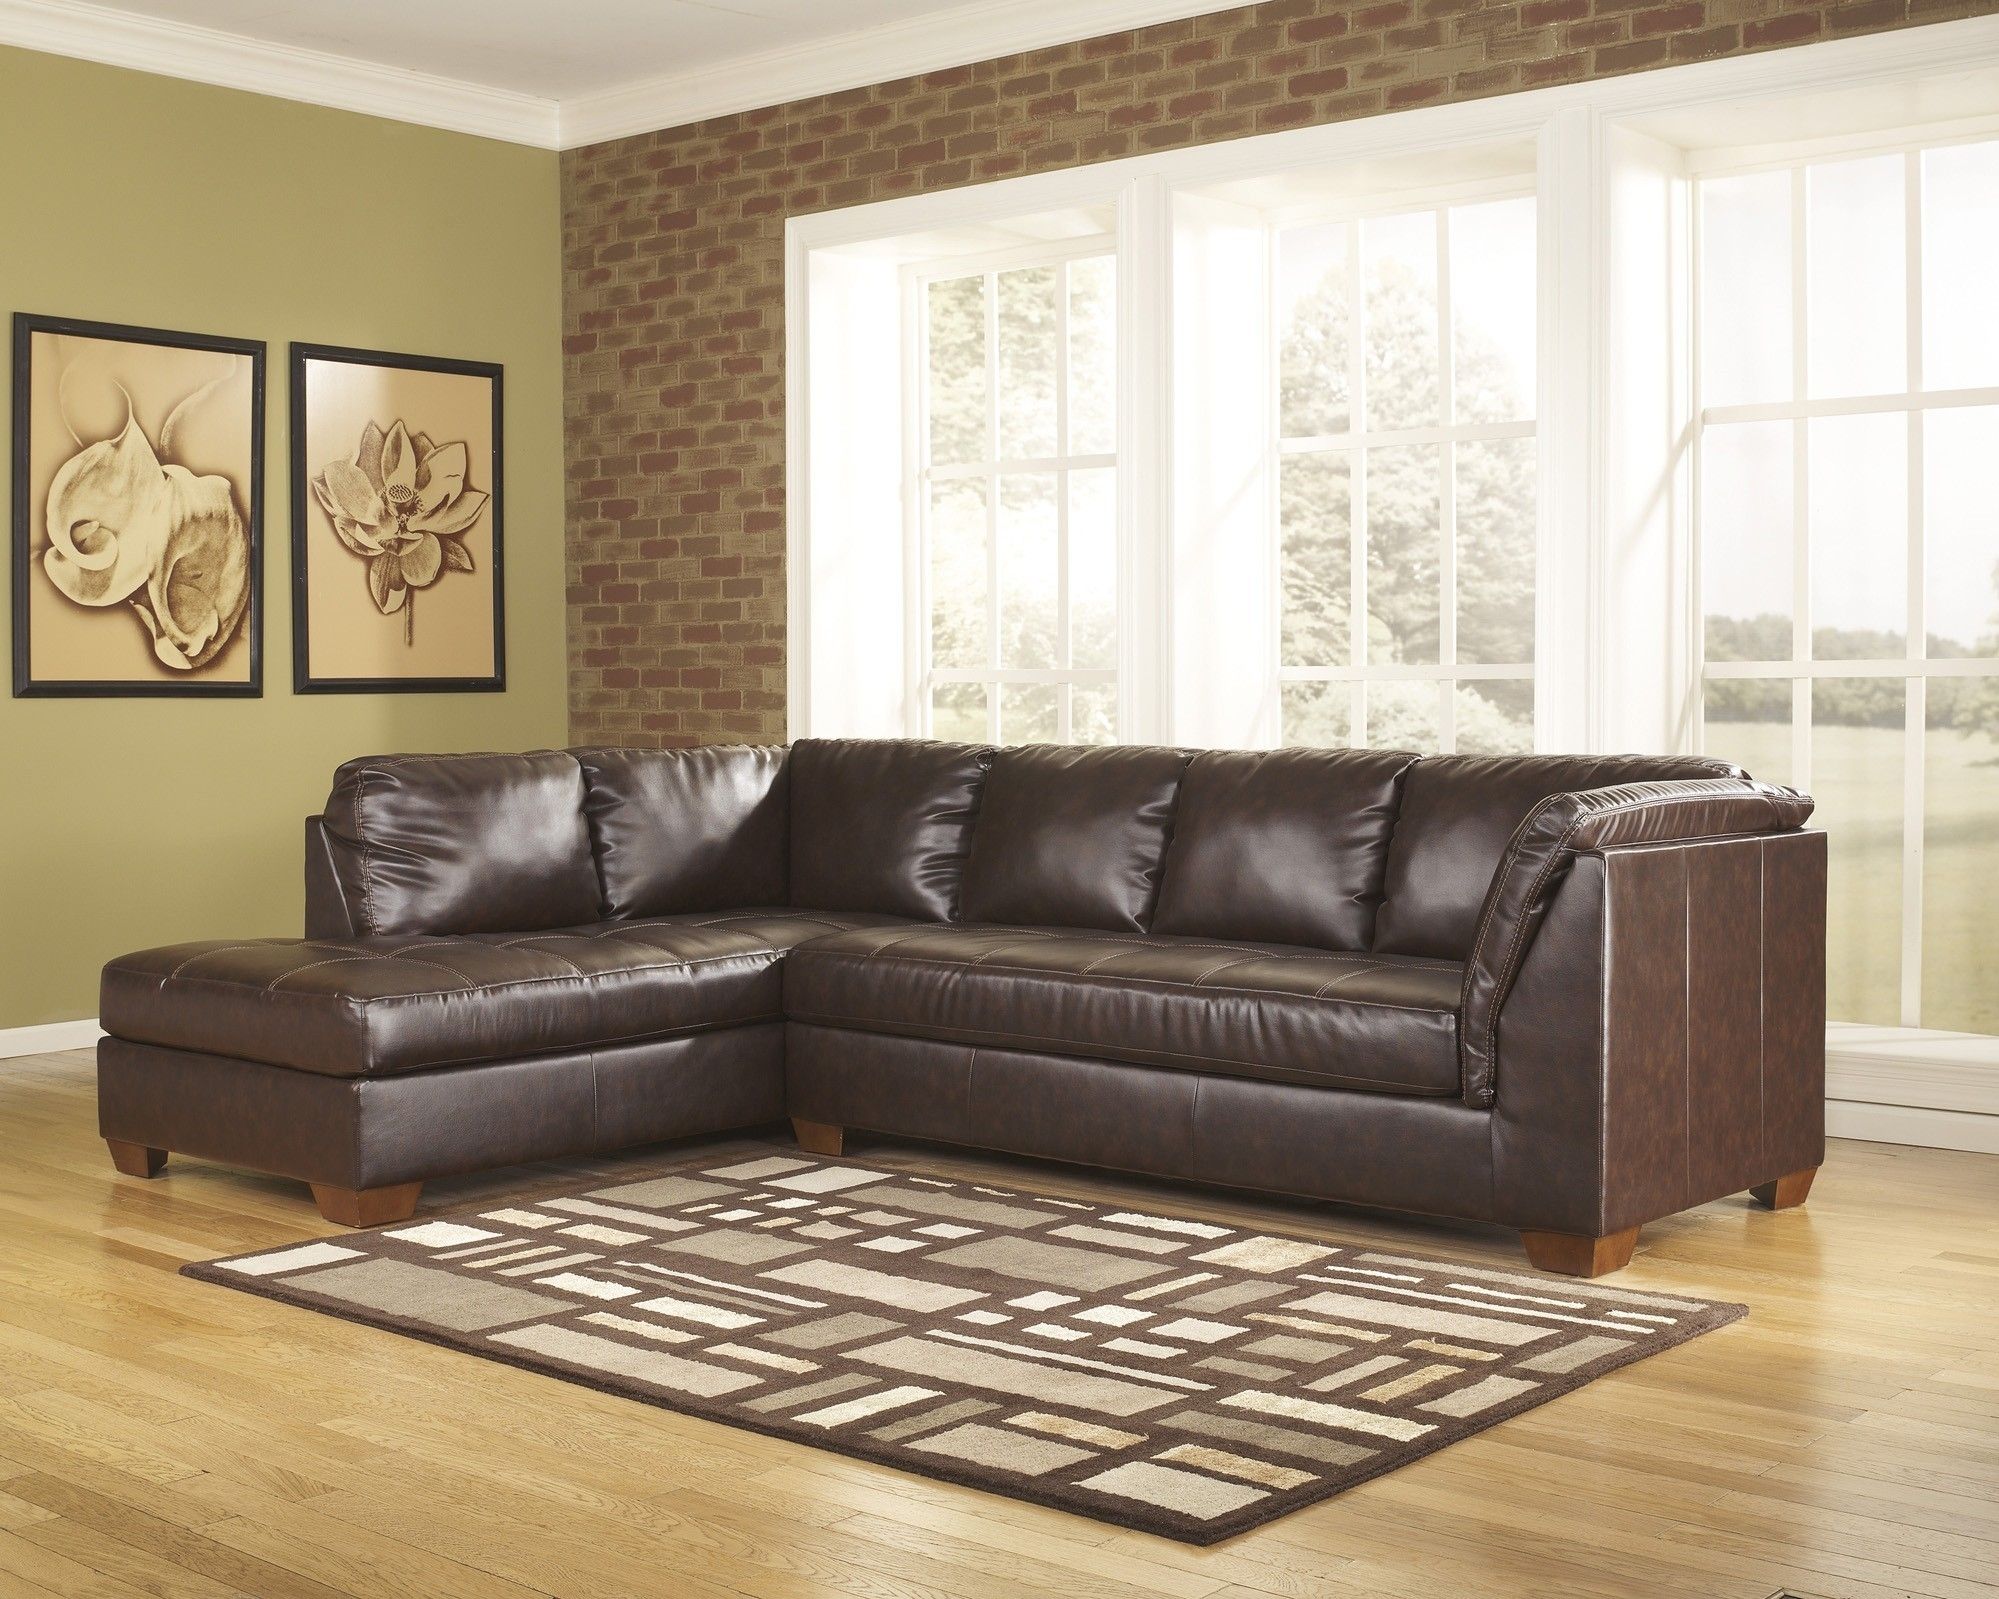 Lovely 2 Piece Sectional Sofa – Buildsimplehome In Evan 2 Piece Sectionals With Raf Chaise (View 12 of 30)